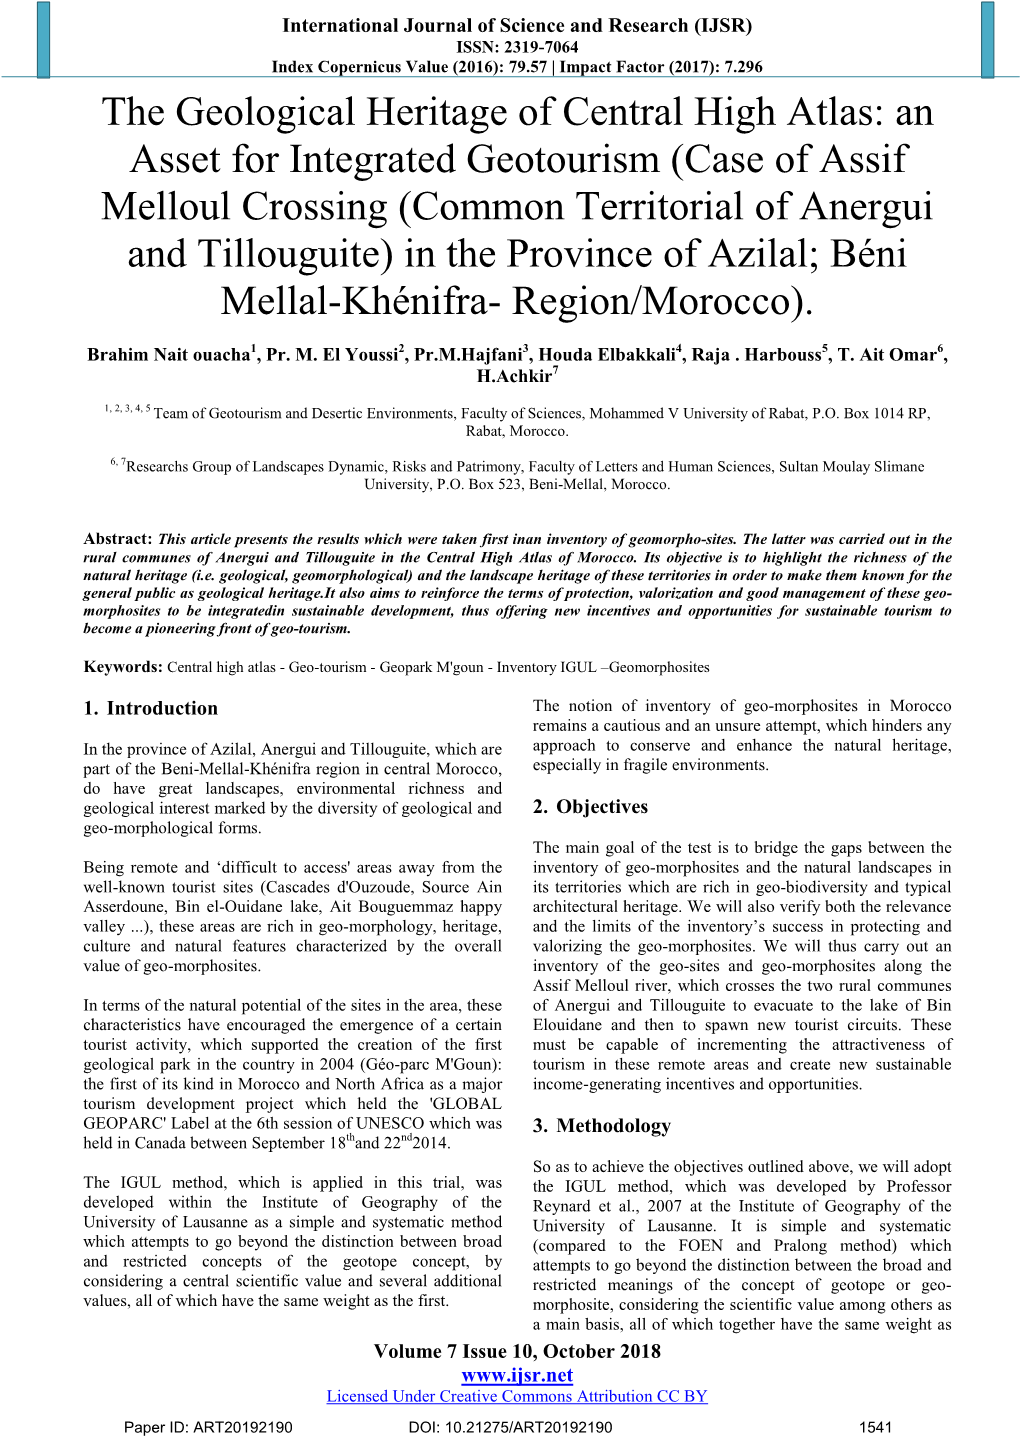 The Geological Heritage of Central High Atlas: an Asset for Integrated